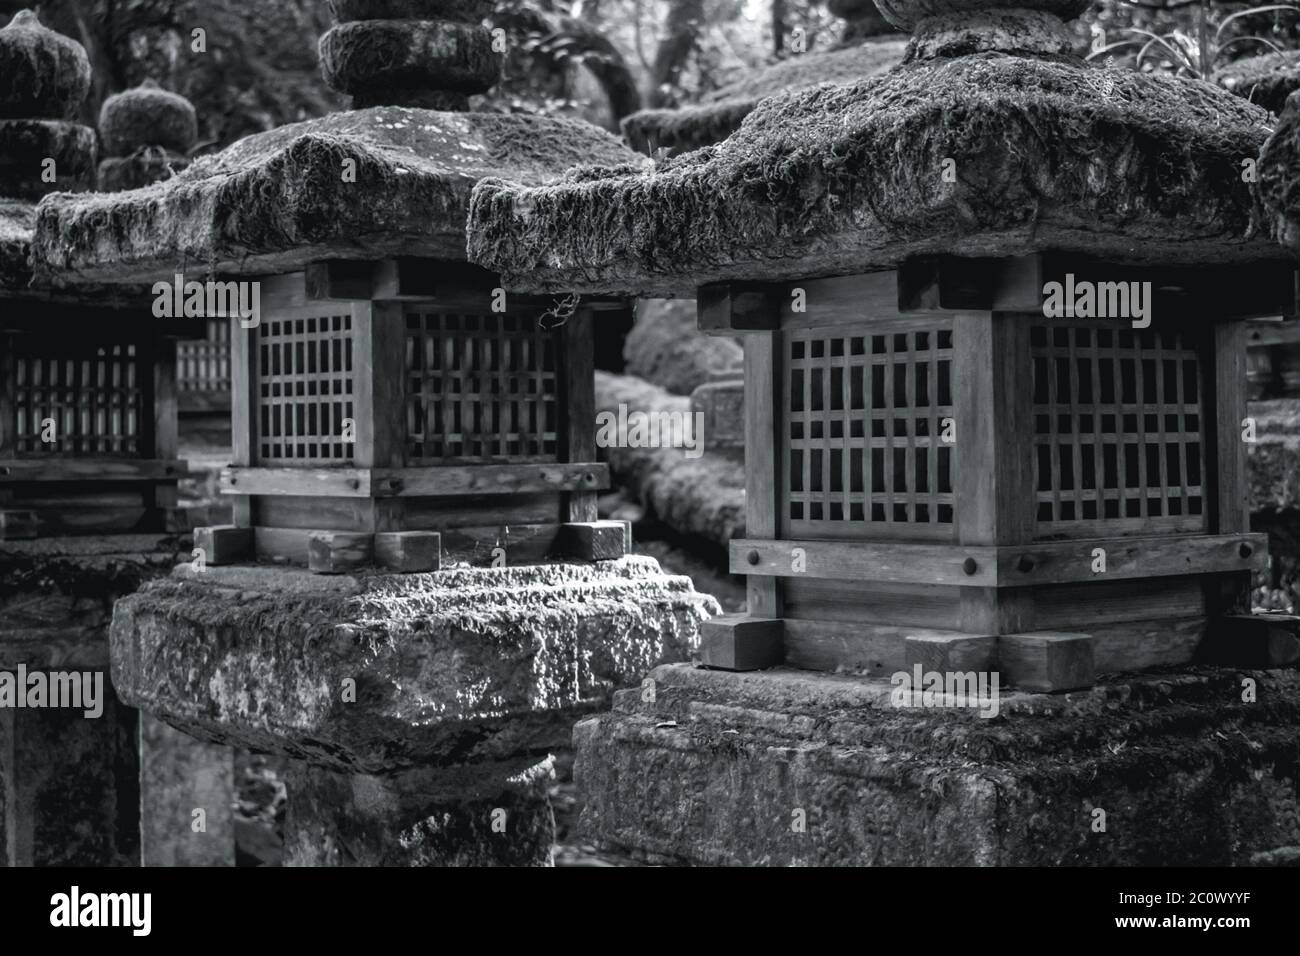 Wooden lanterns on stone pillars covered by moss in Nara Japan Stock Photo